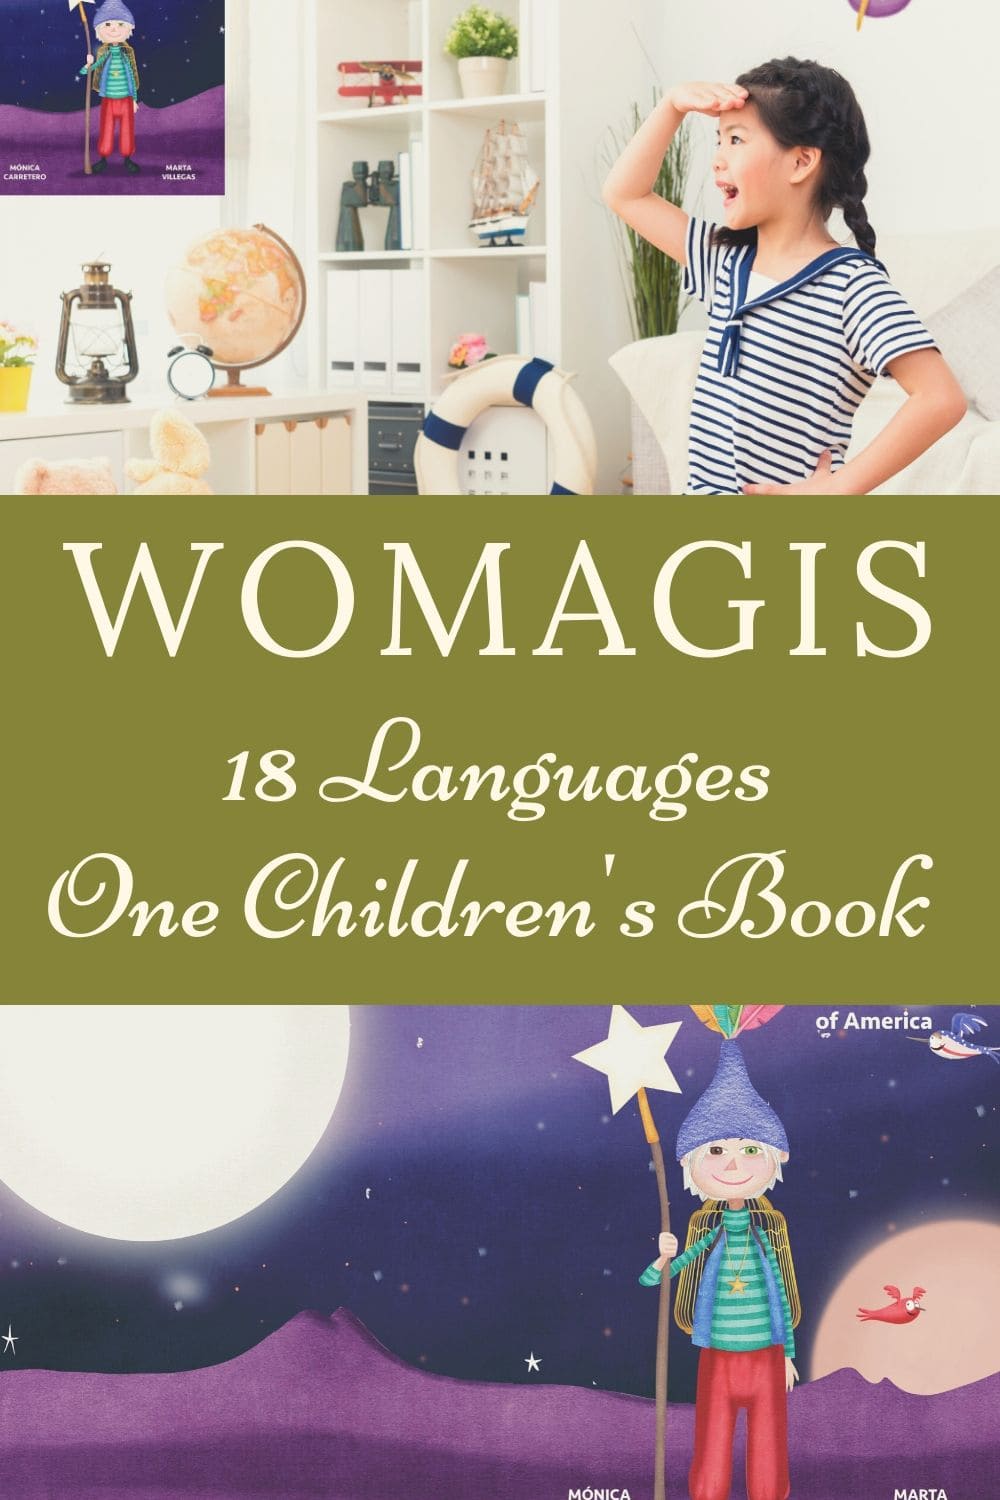 Review of Womagis